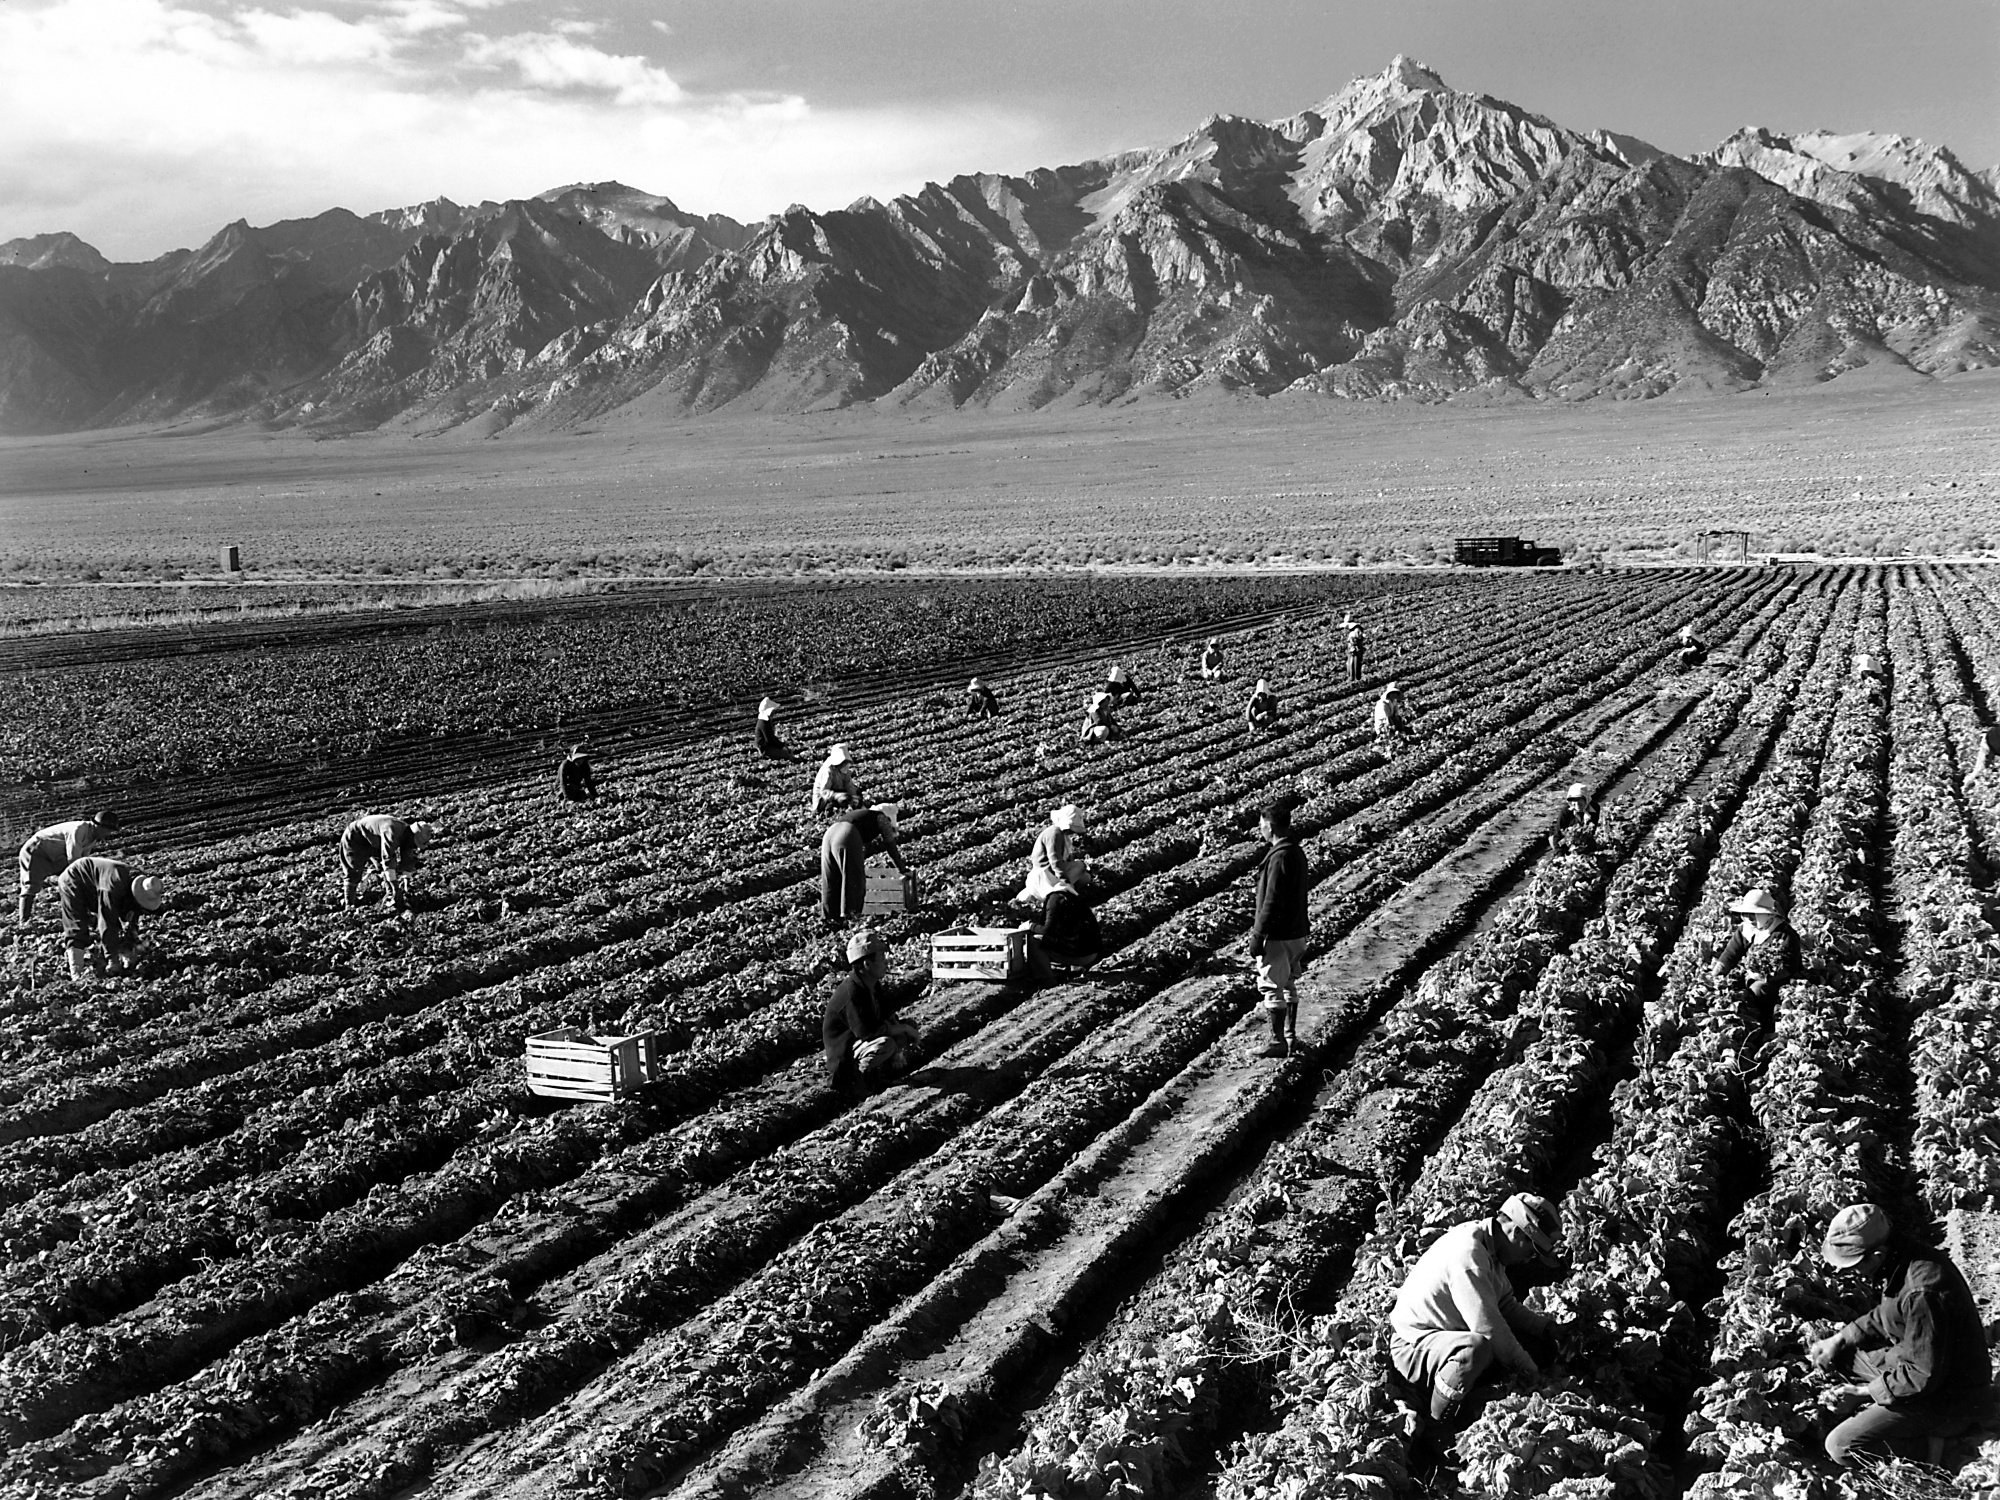 black and white Ansel Adams photo of field laborers